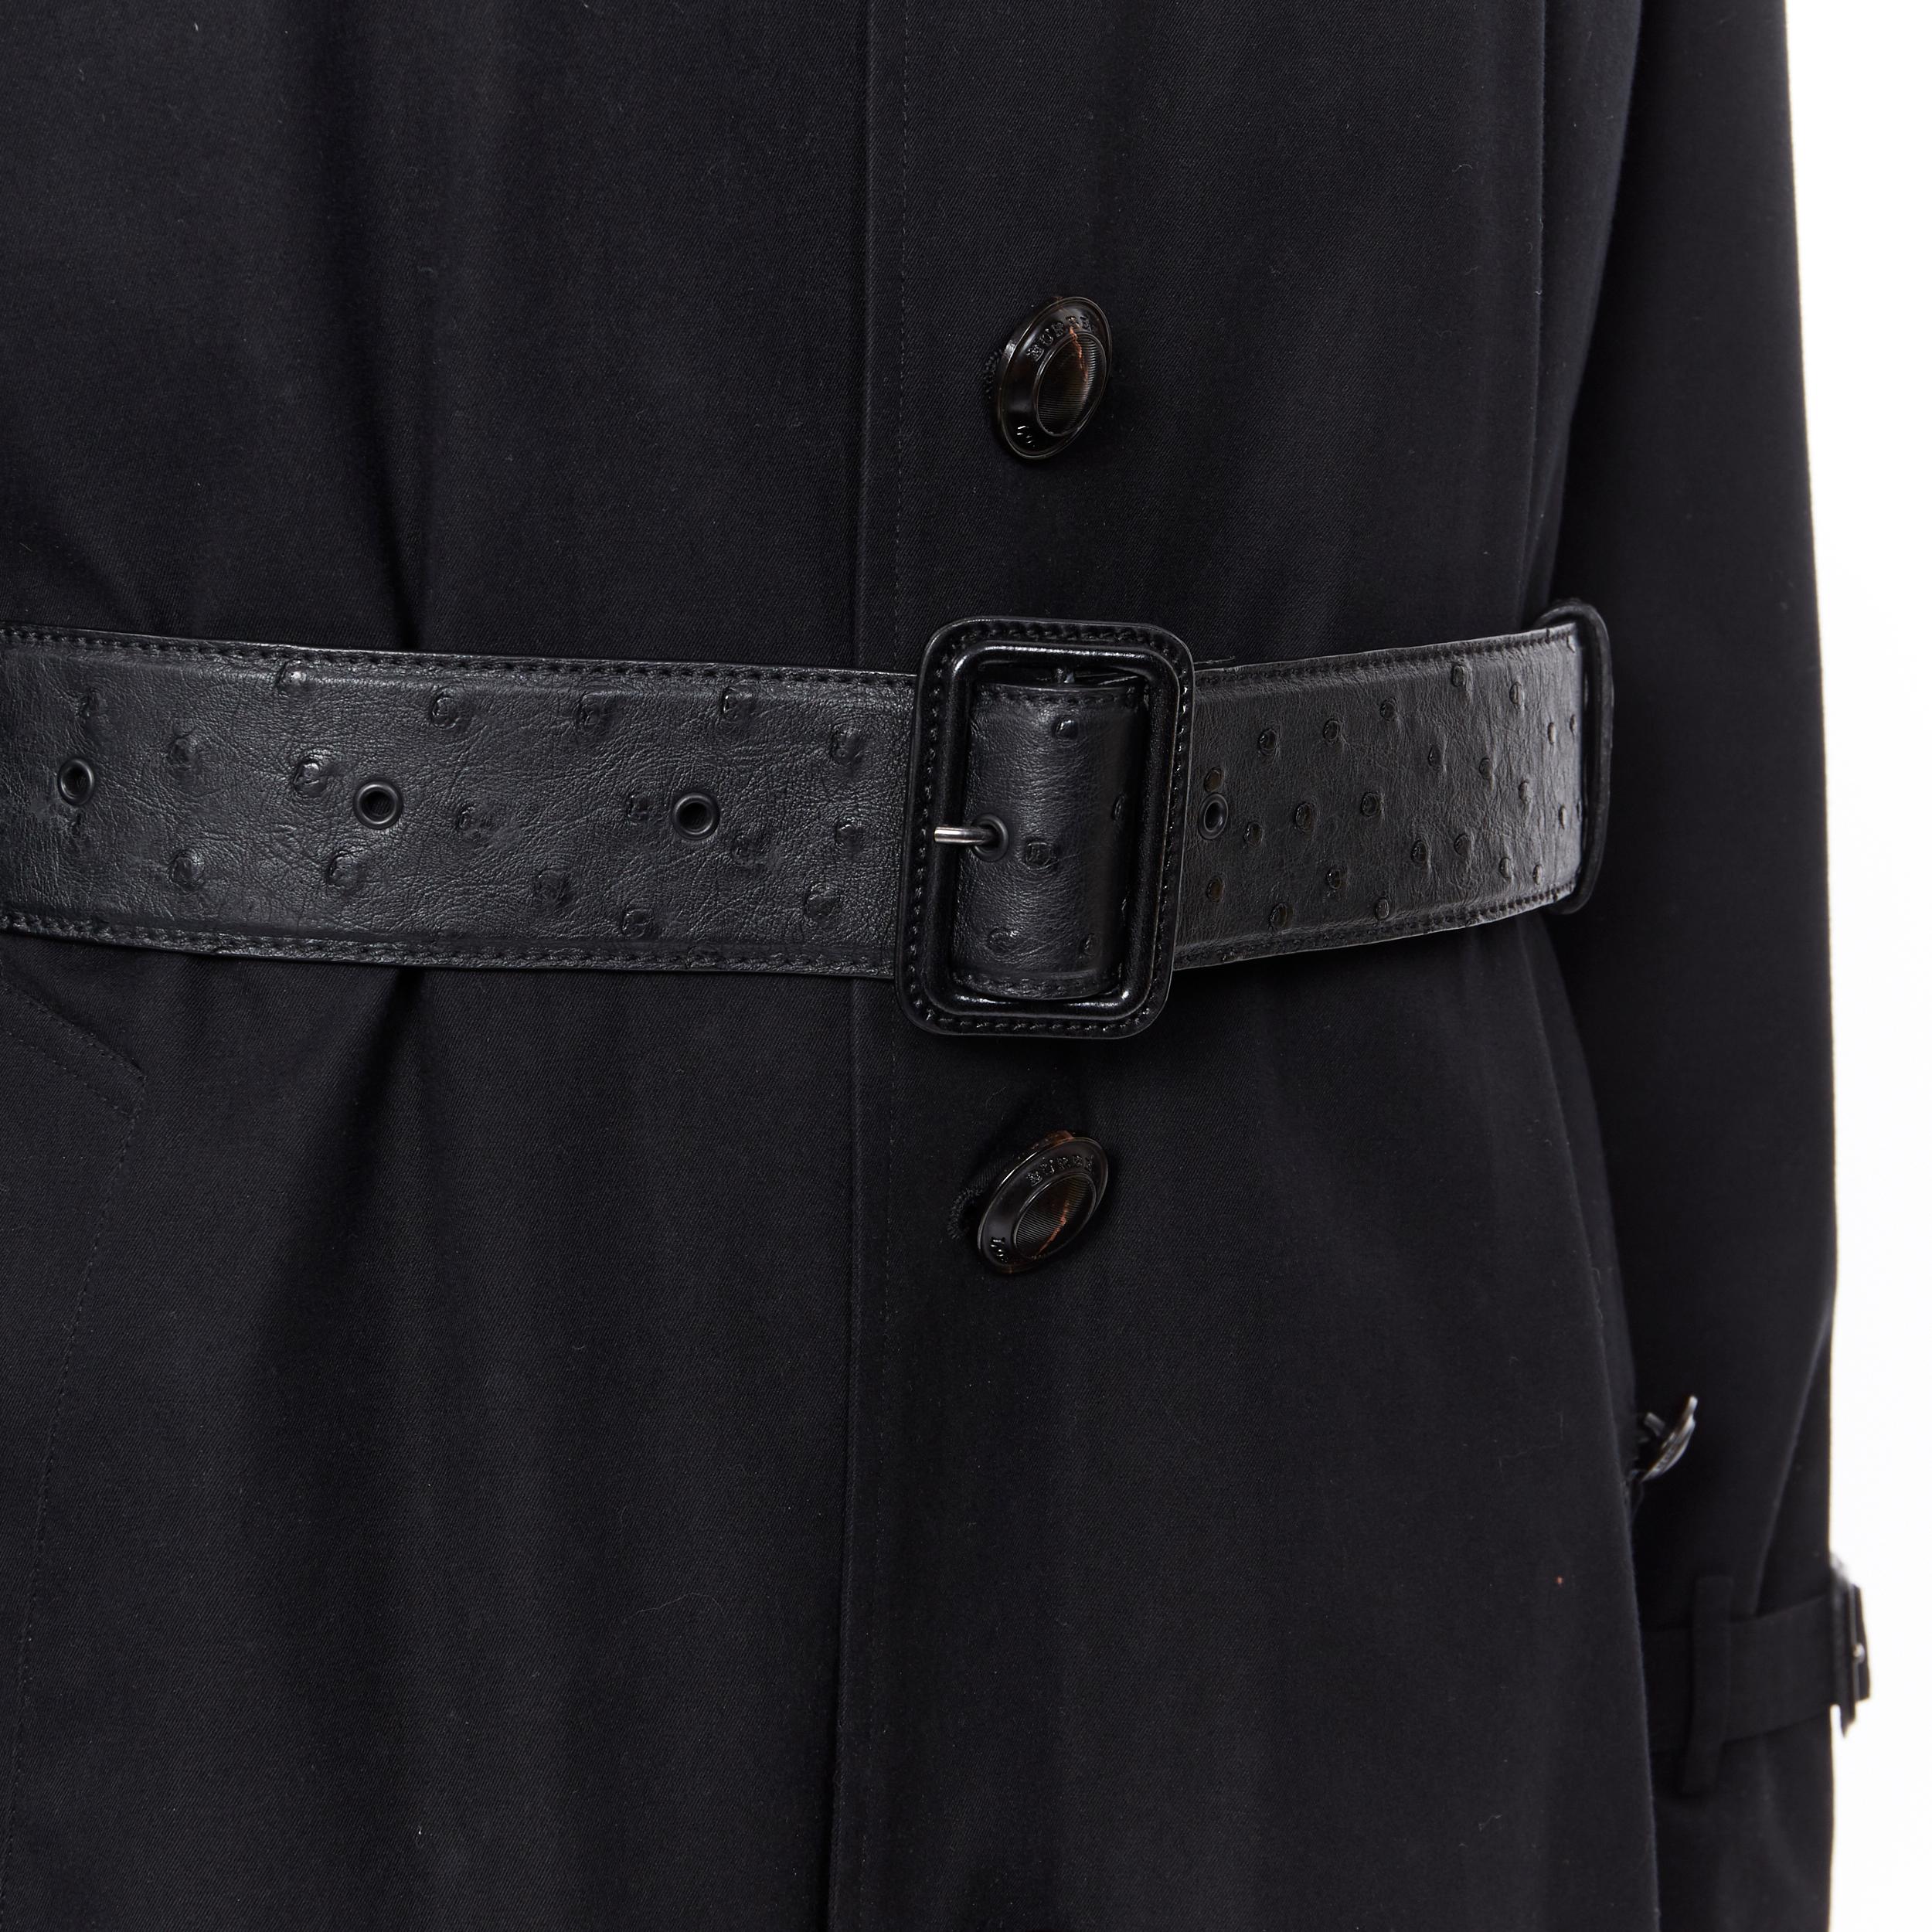 BURBERRY PRORSUM black cotton removable rabbit fur lining ostrich belt trench L
Brand: Burberry
Designer: Christopher Bailey
Model Name / Style: Trench coat
Material: Cotton
Color: Black
Pattern: Solid
Closure: Button
Extra Detail: Detachable rabbit